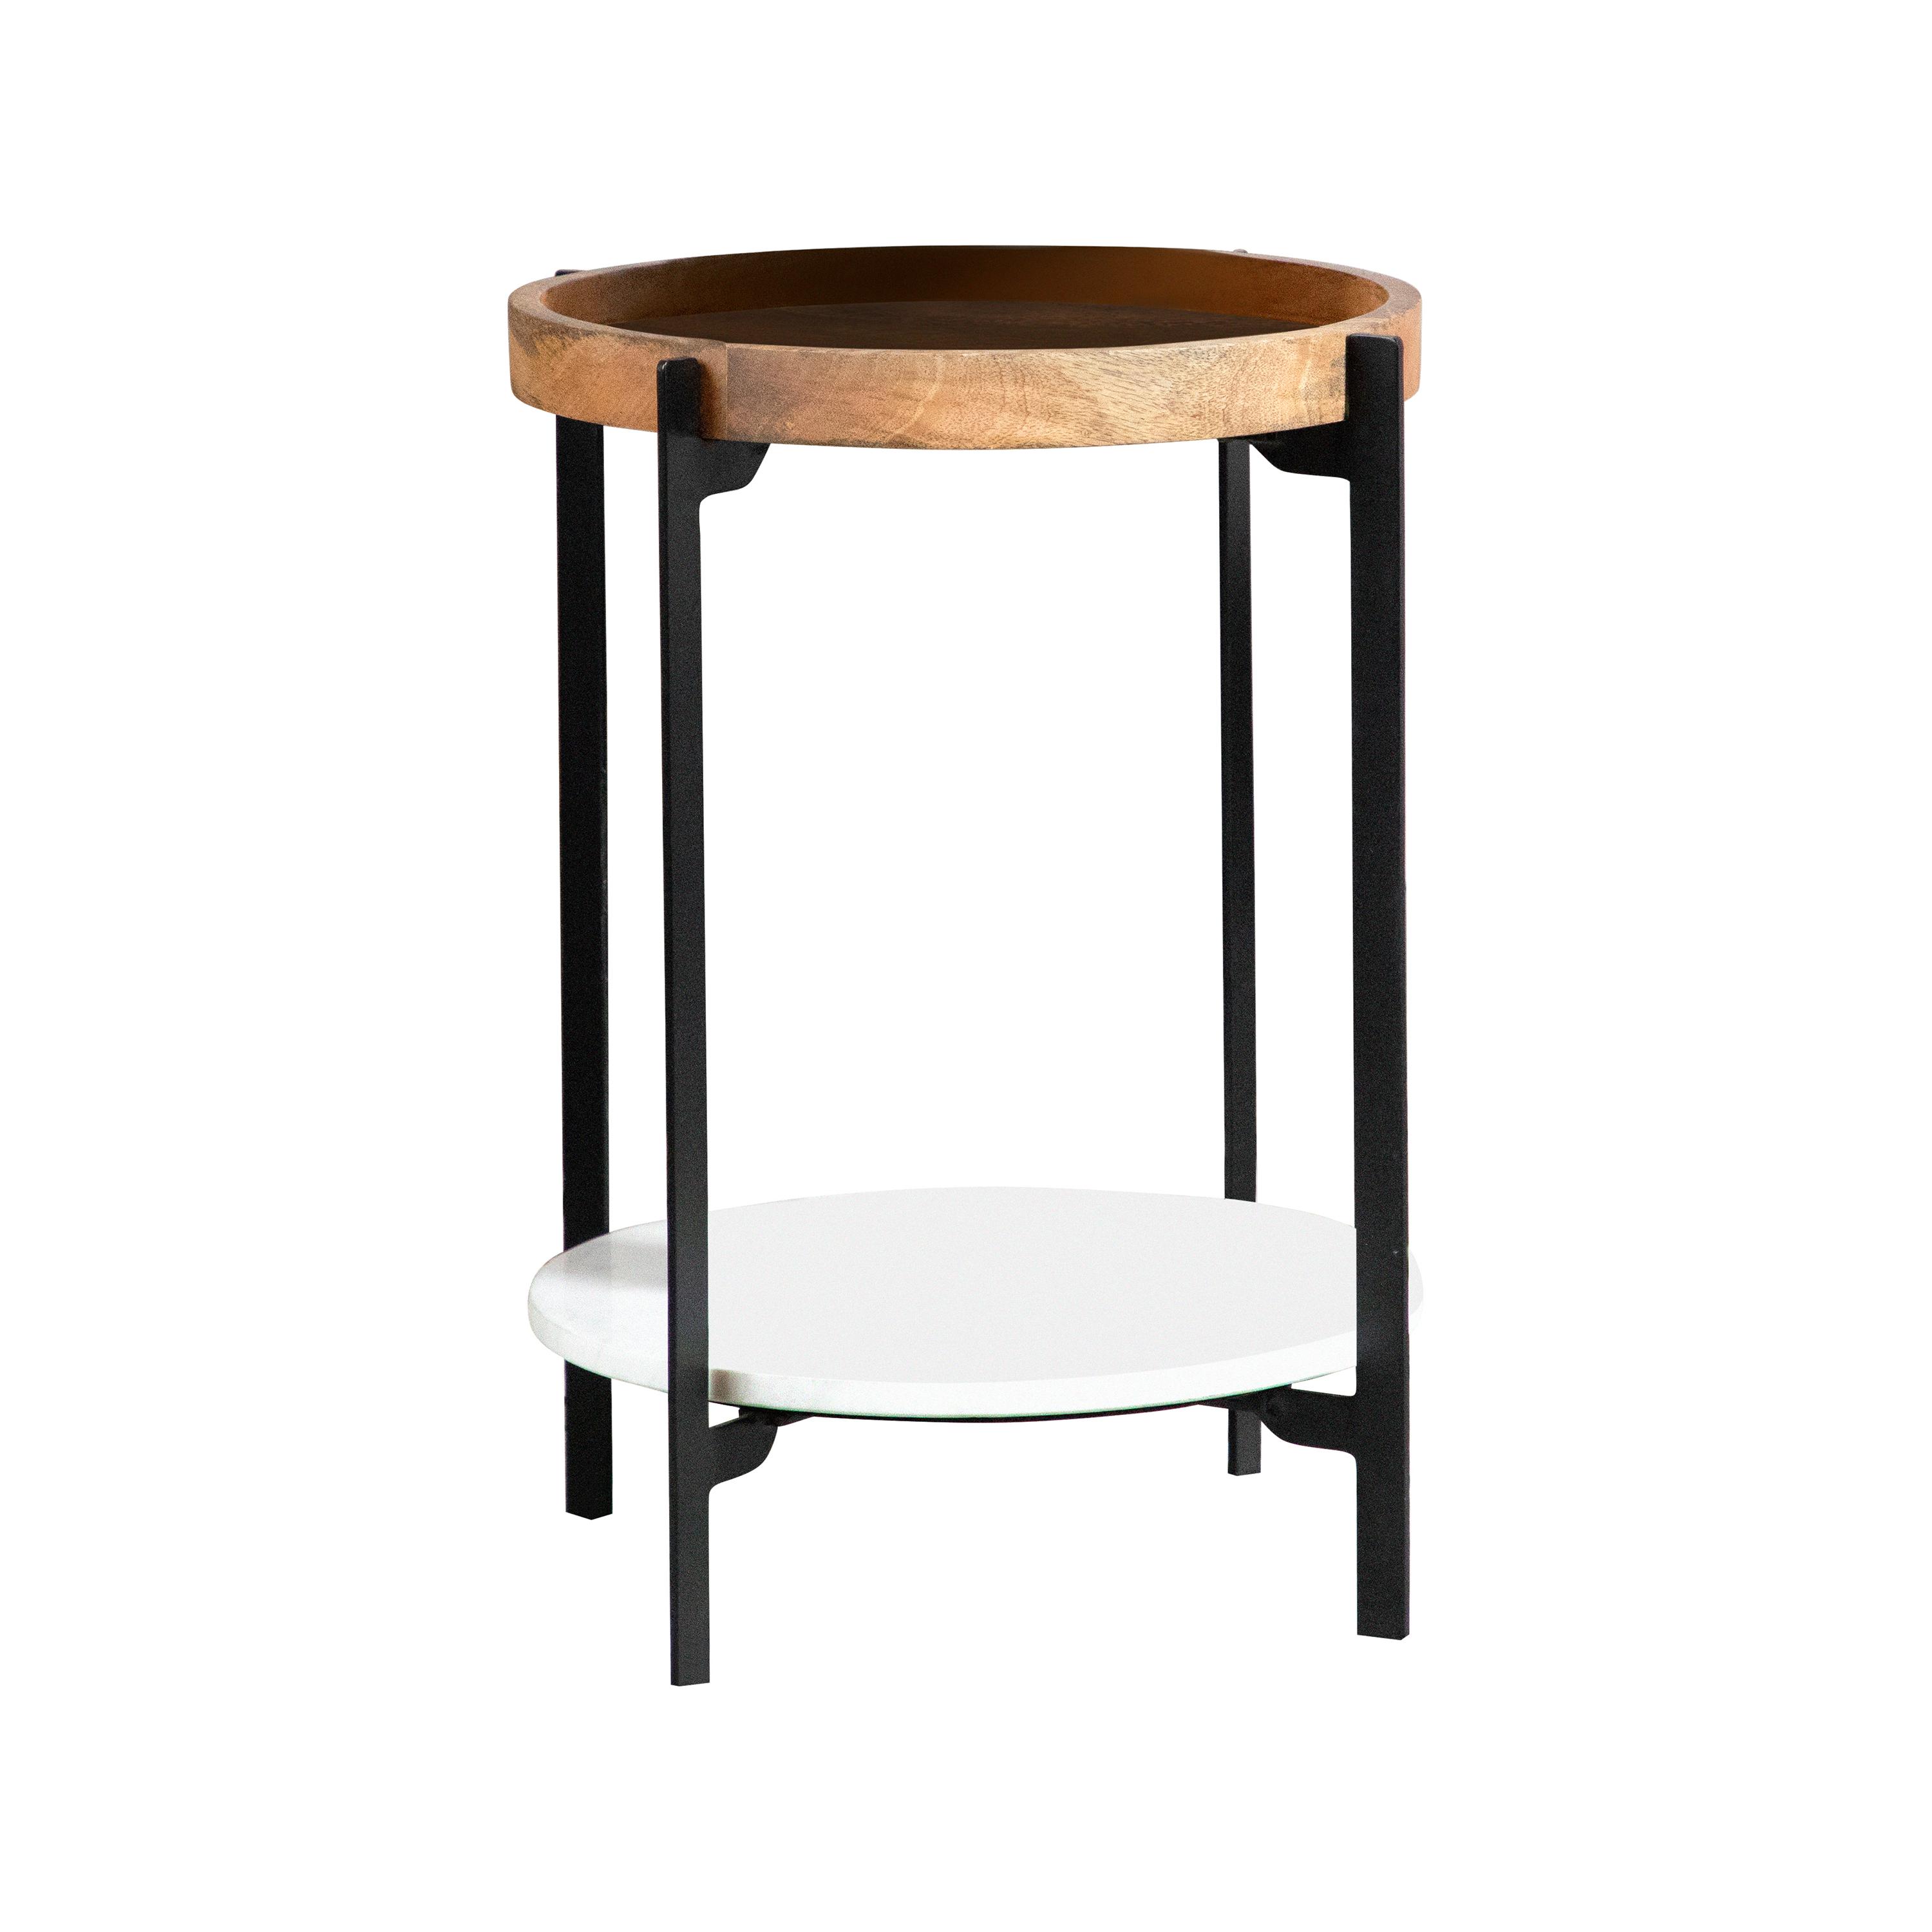 Rustic Accent Table 931218 931218 in Natural, Black 